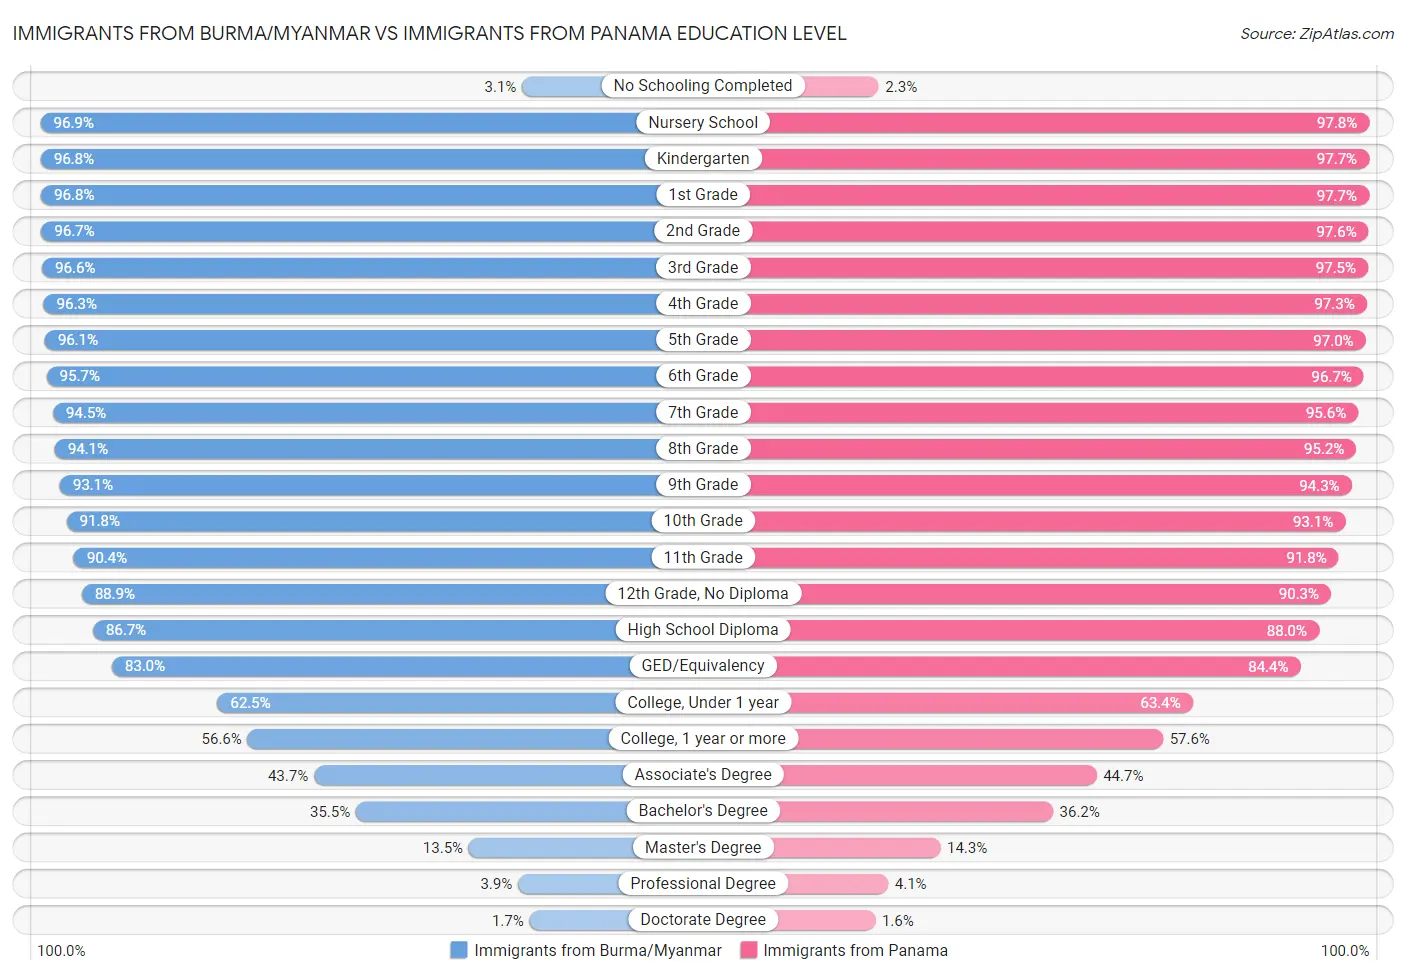 Immigrants from Burma/Myanmar vs Immigrants from Panama Education Level